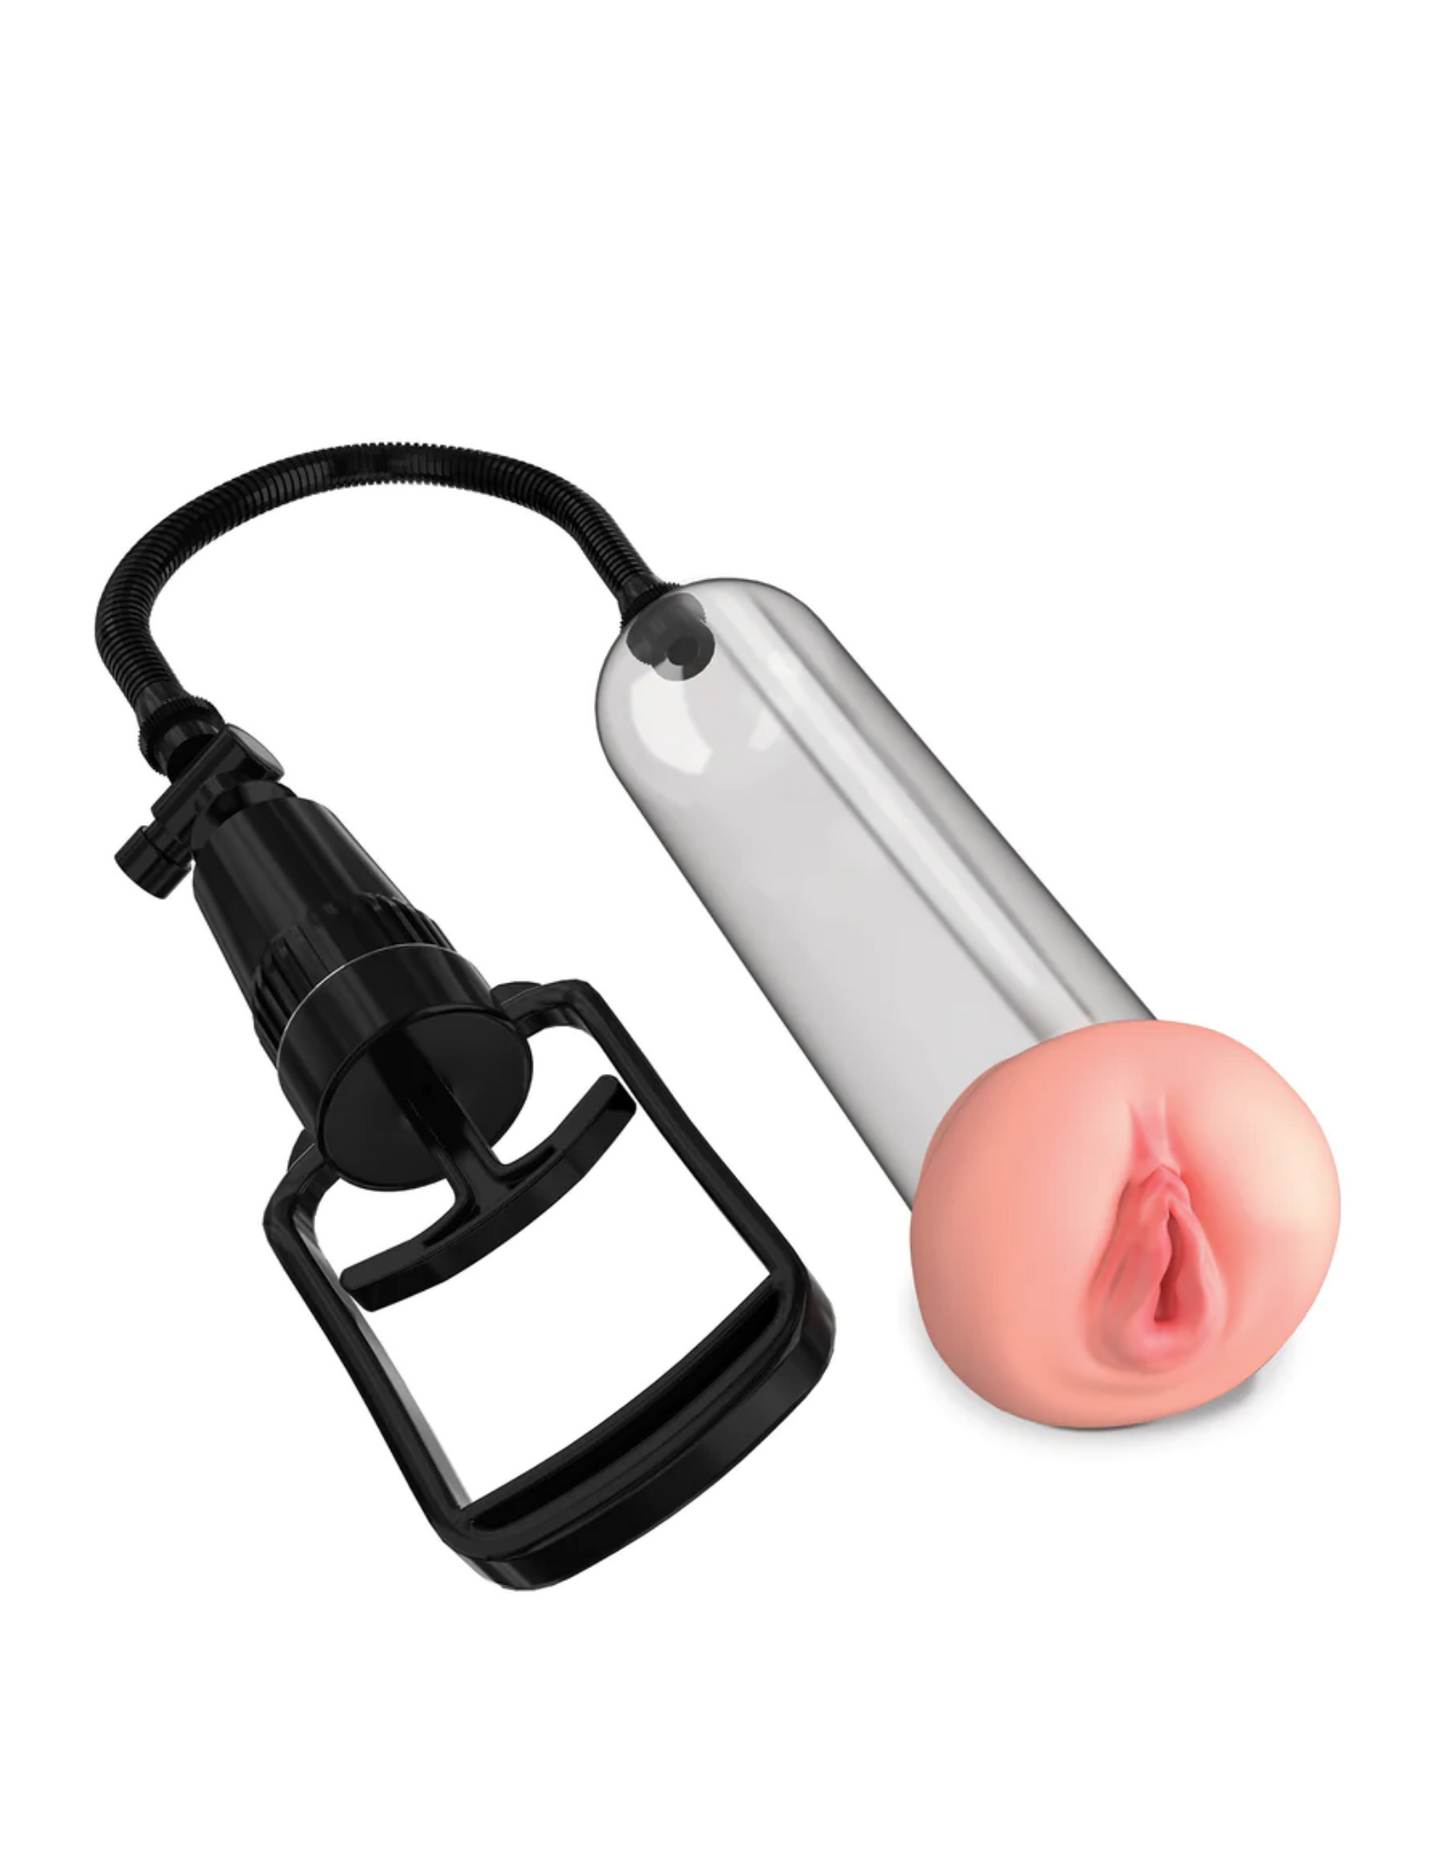 Front angle view of the Pump Worx Beginner's Pussy Pump Enlargement System from Pipedreams shows its vulva-like point of entry.